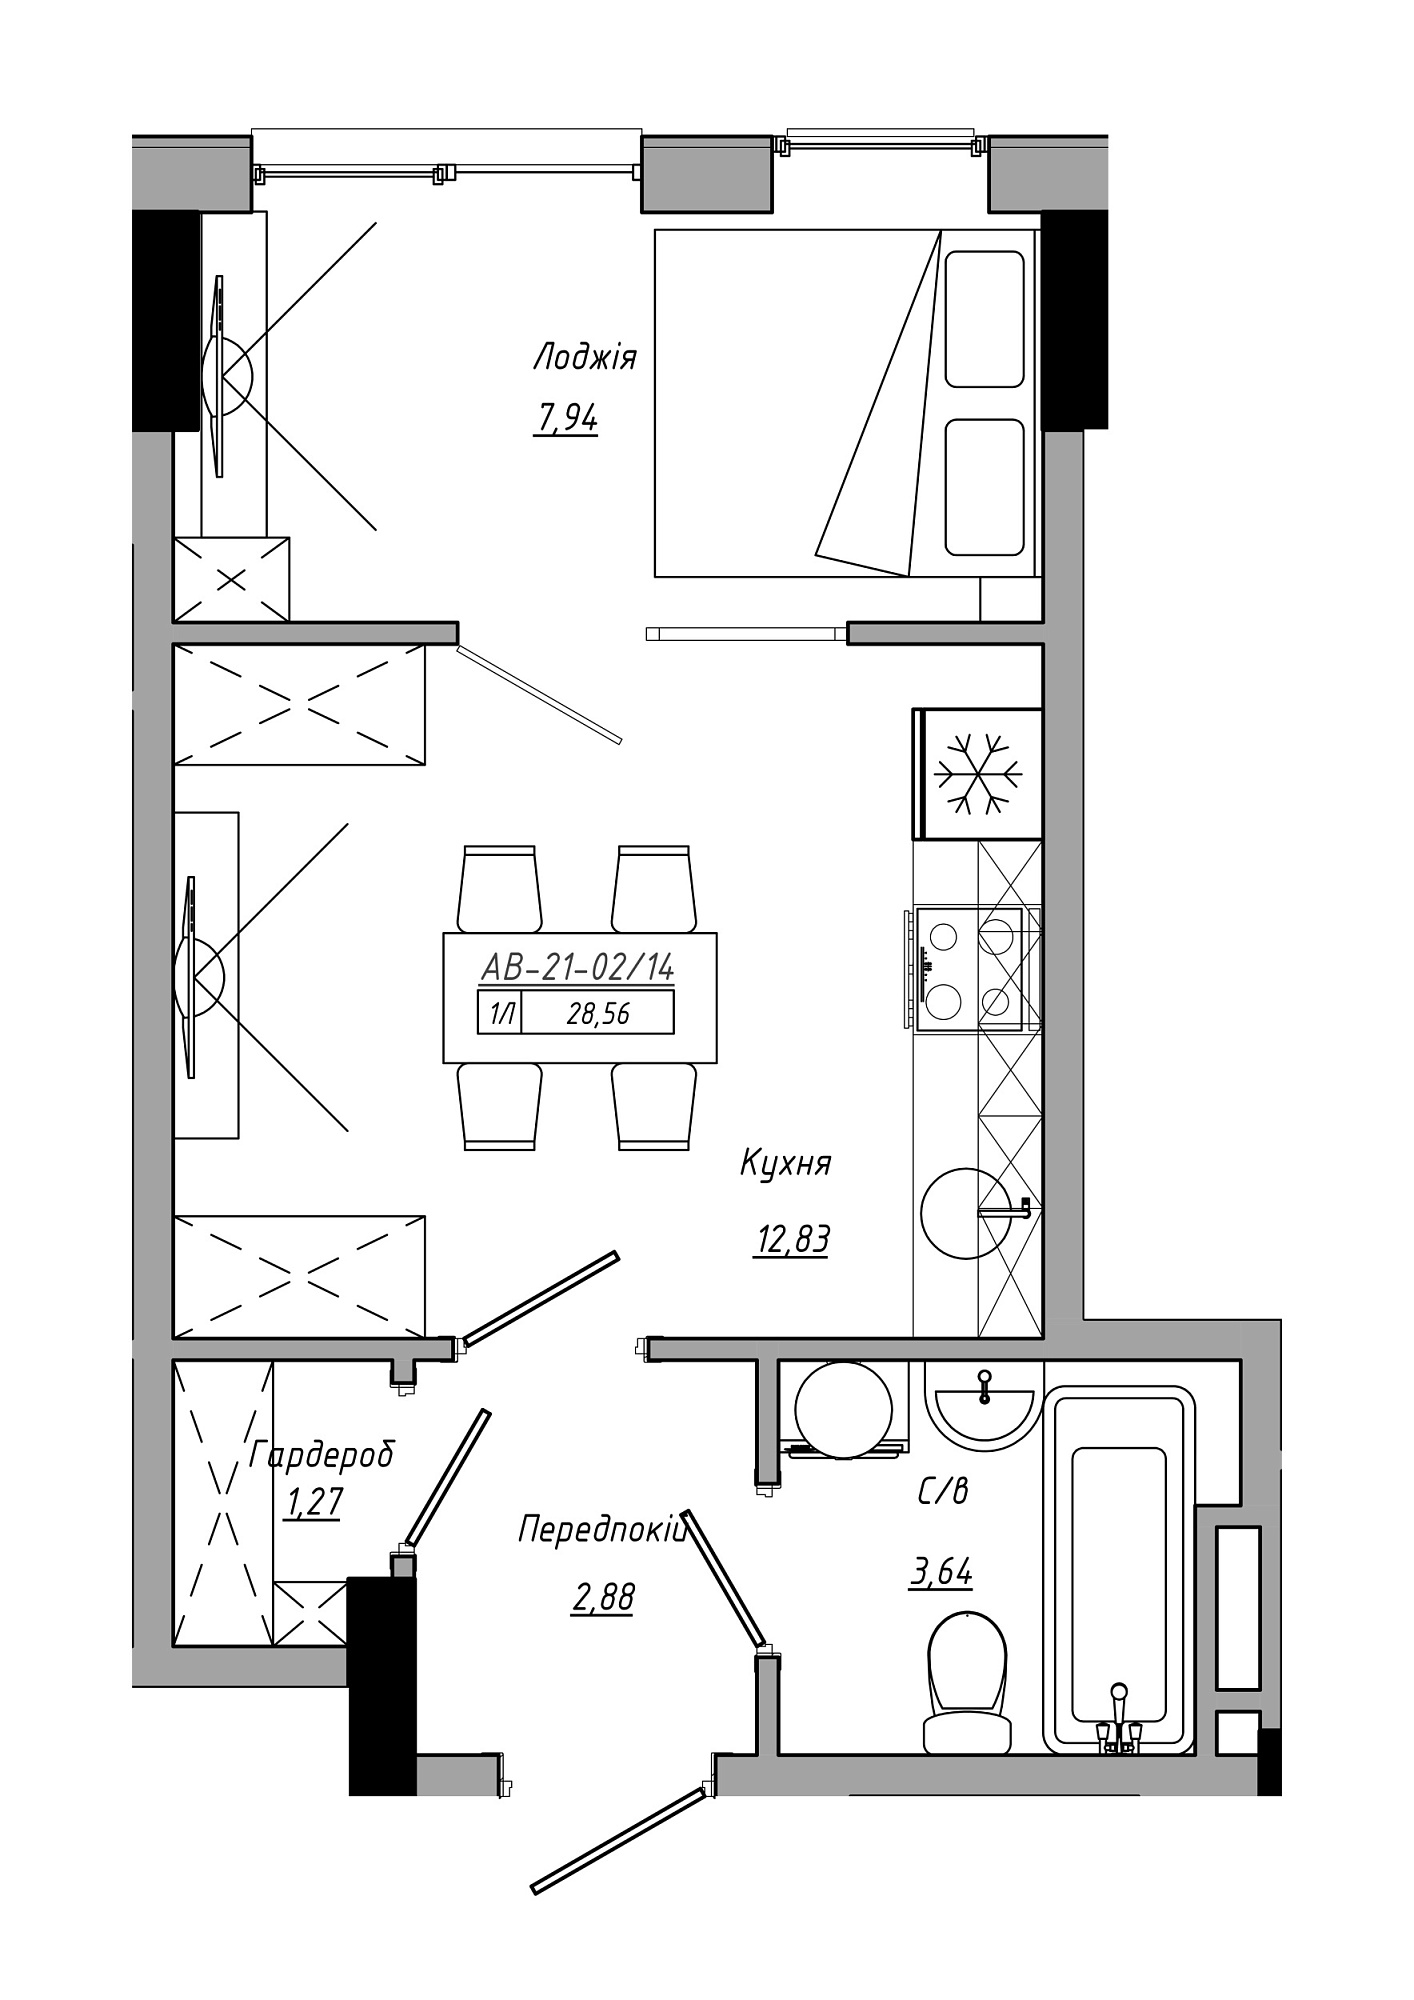 Planning 1-rm flats area 28.56m2, AB-21-02/00014.